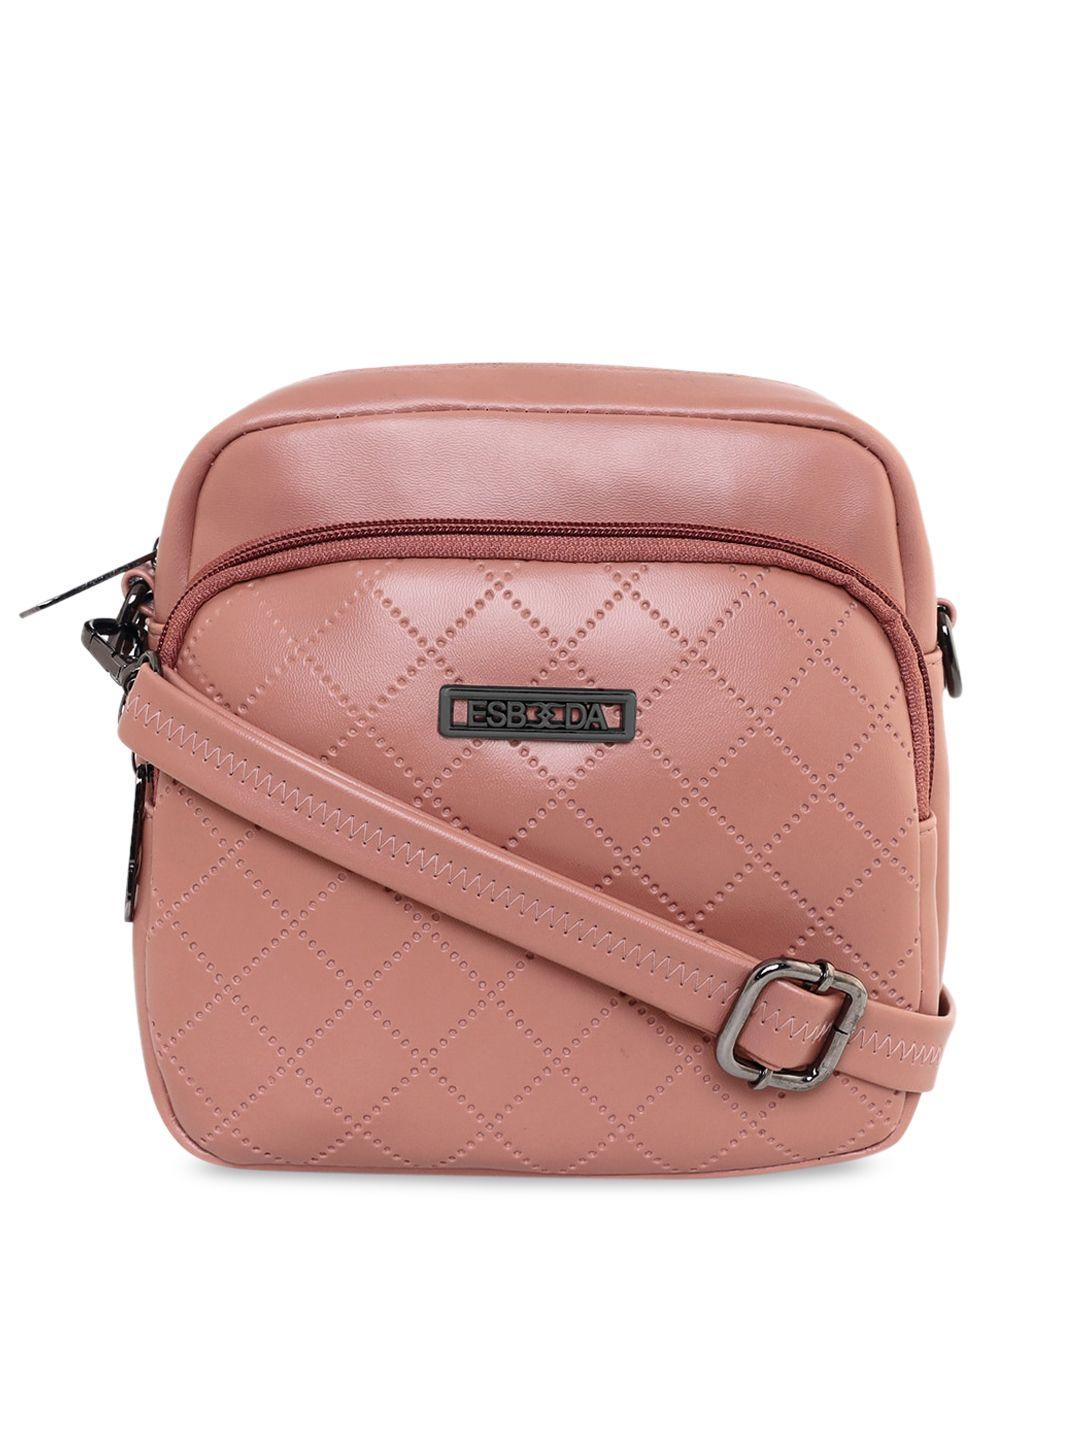 esbeda pink textured pu structured sling bag with quilted